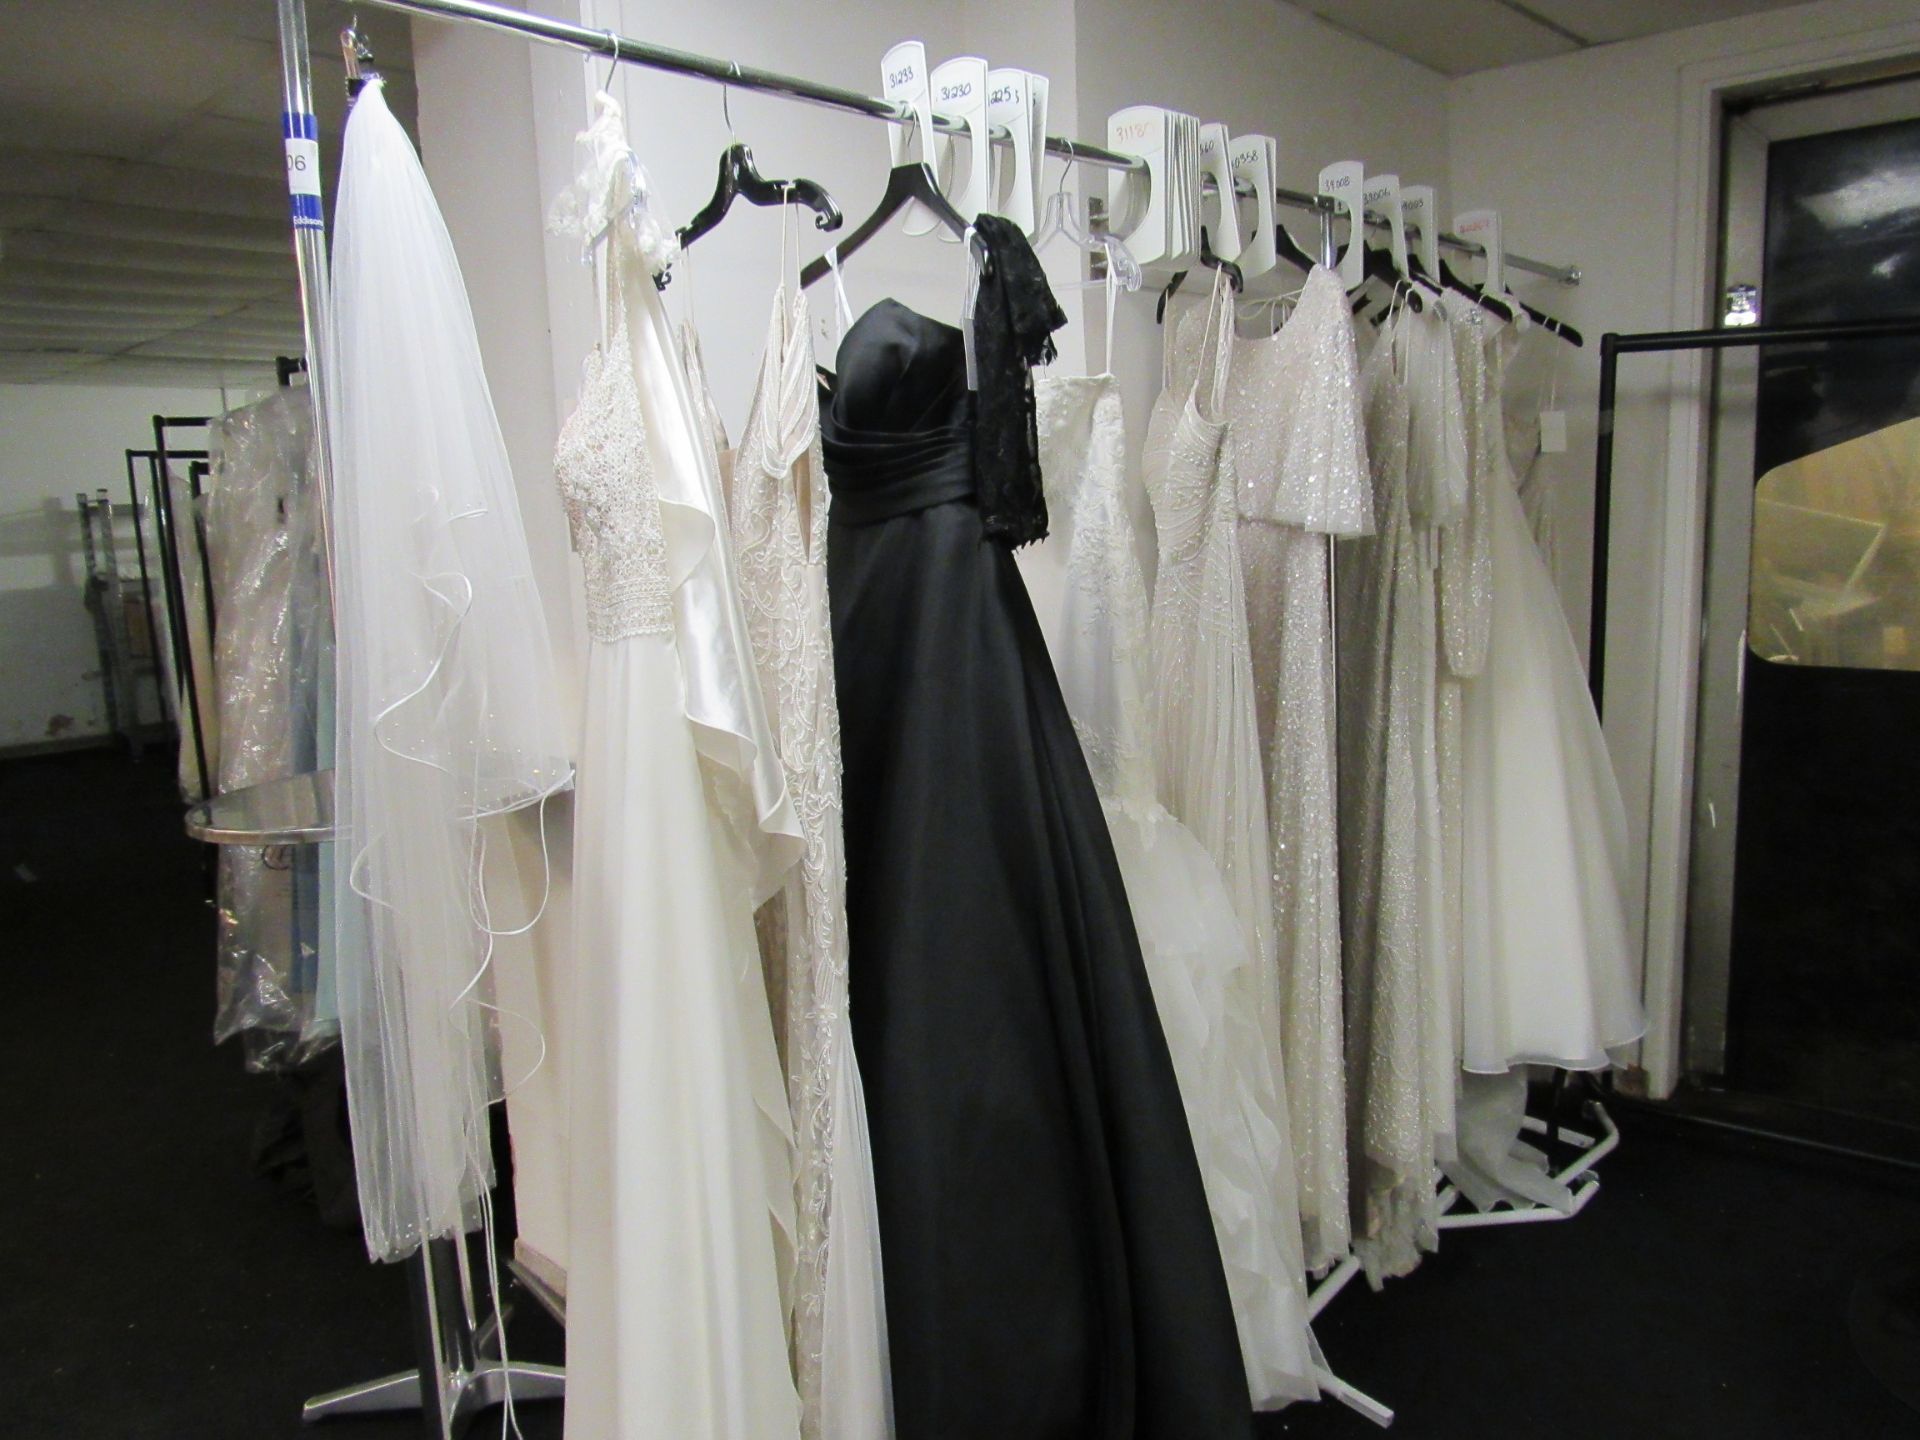 12 various bridal gowns to rail - Image 2 of 4